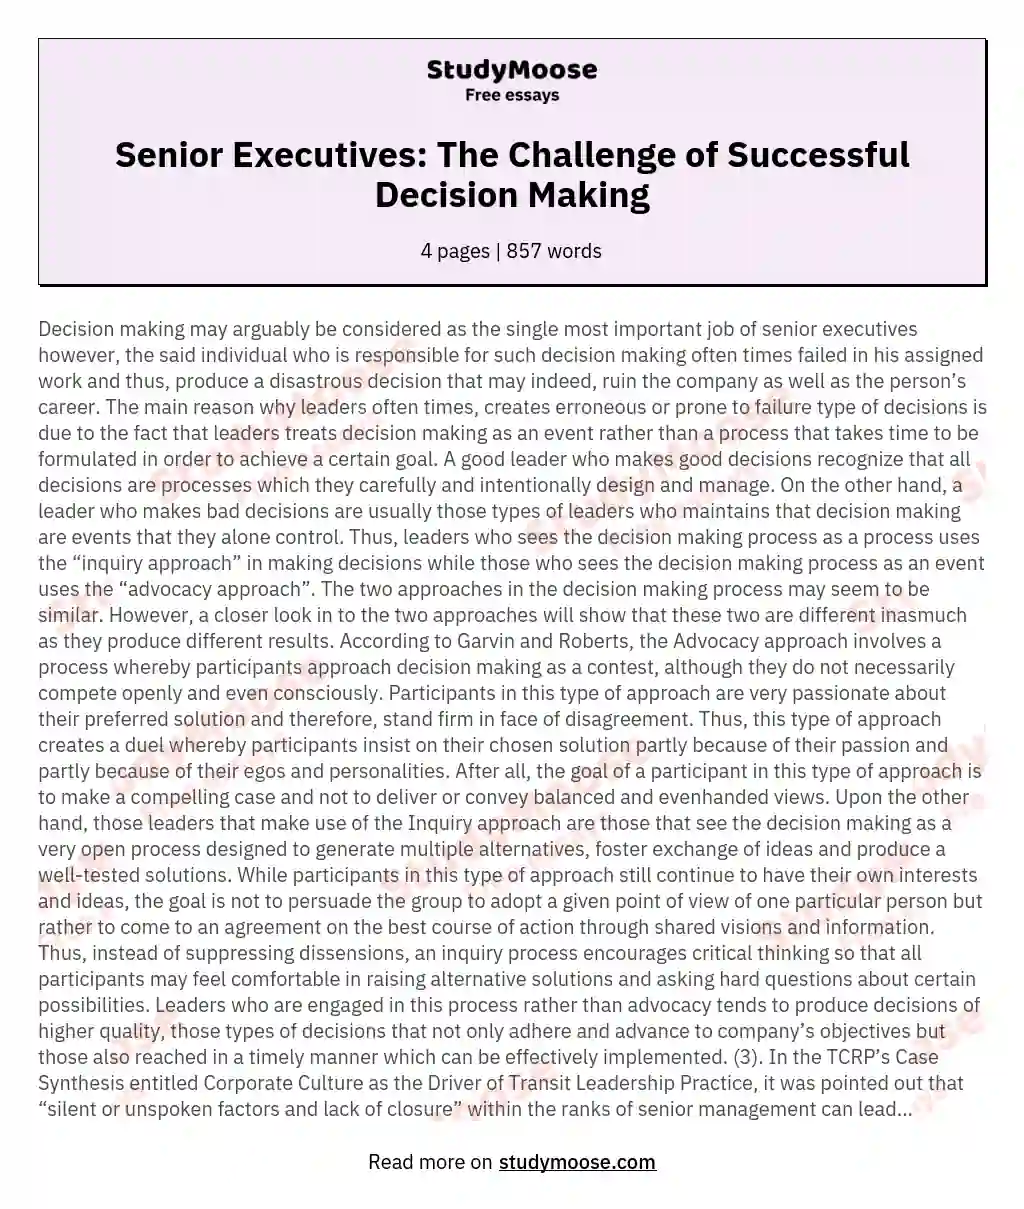 Senior Executives: The Challenge of Successful Decision Making essay